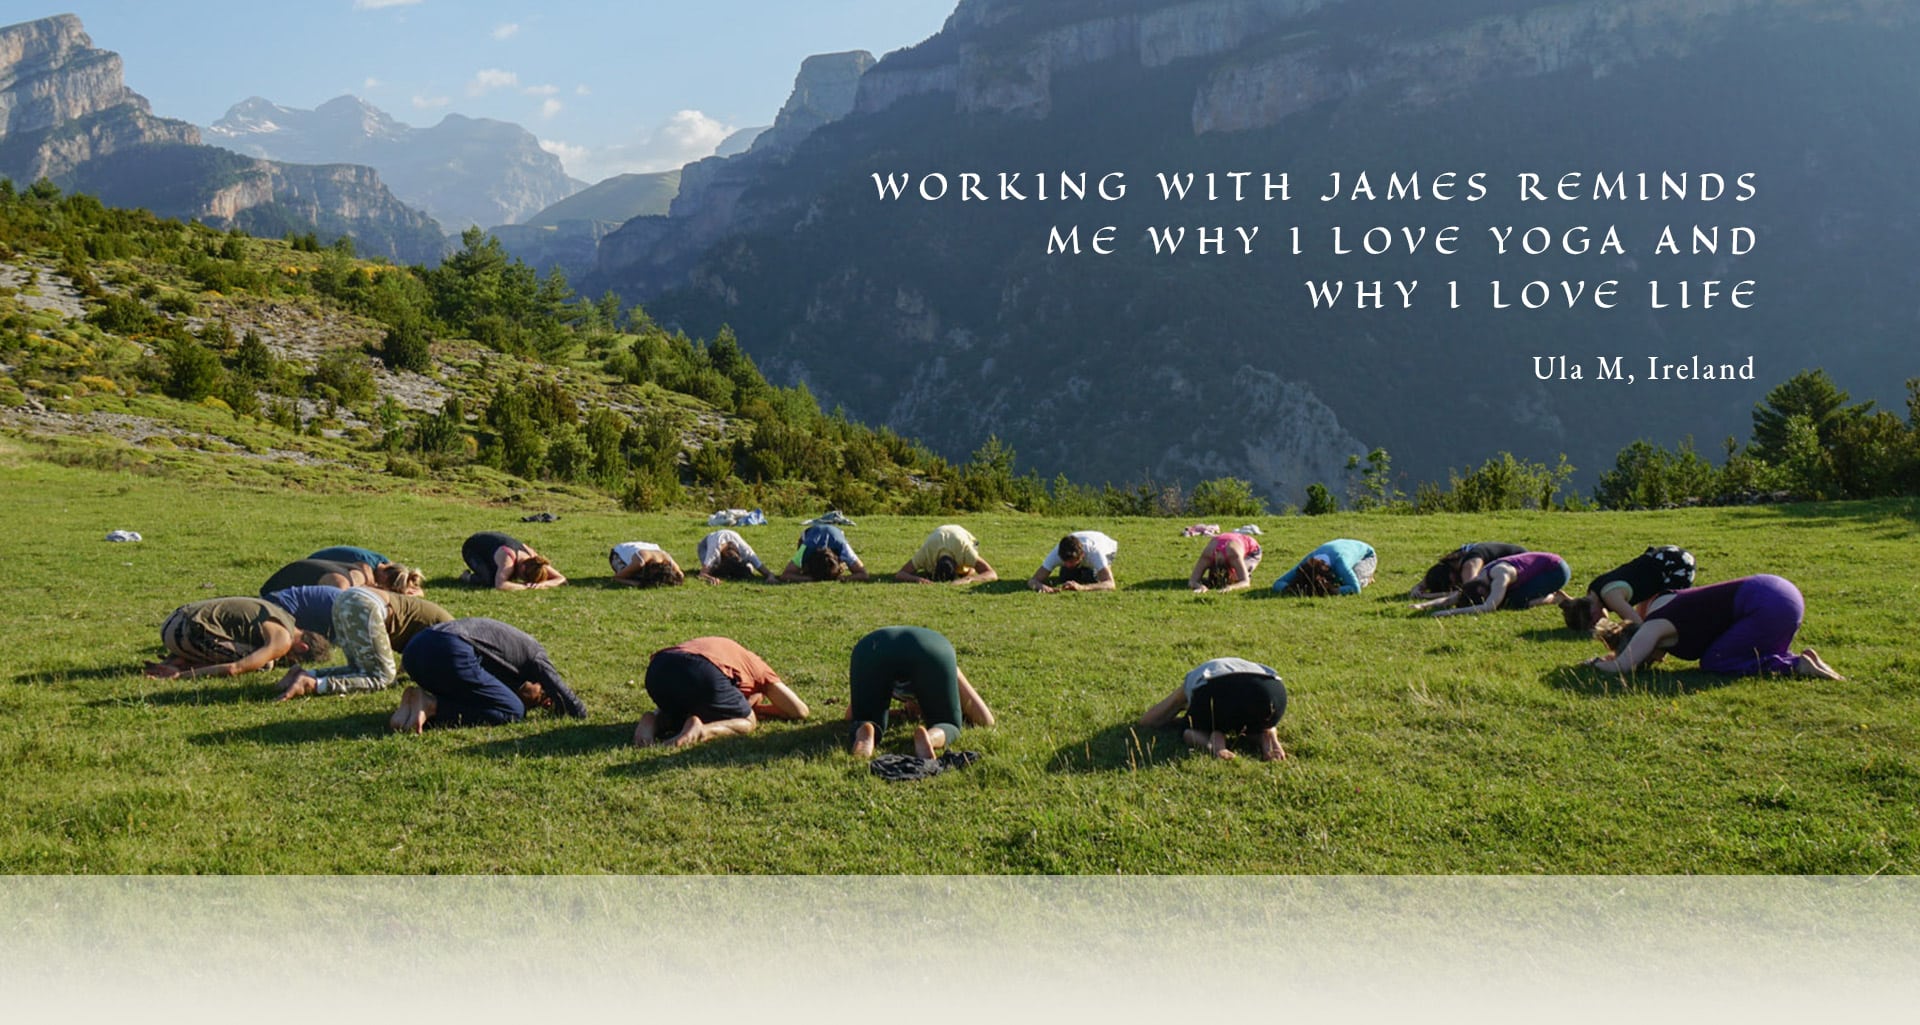 Working with James reminds me why I love yoga and why I love life.